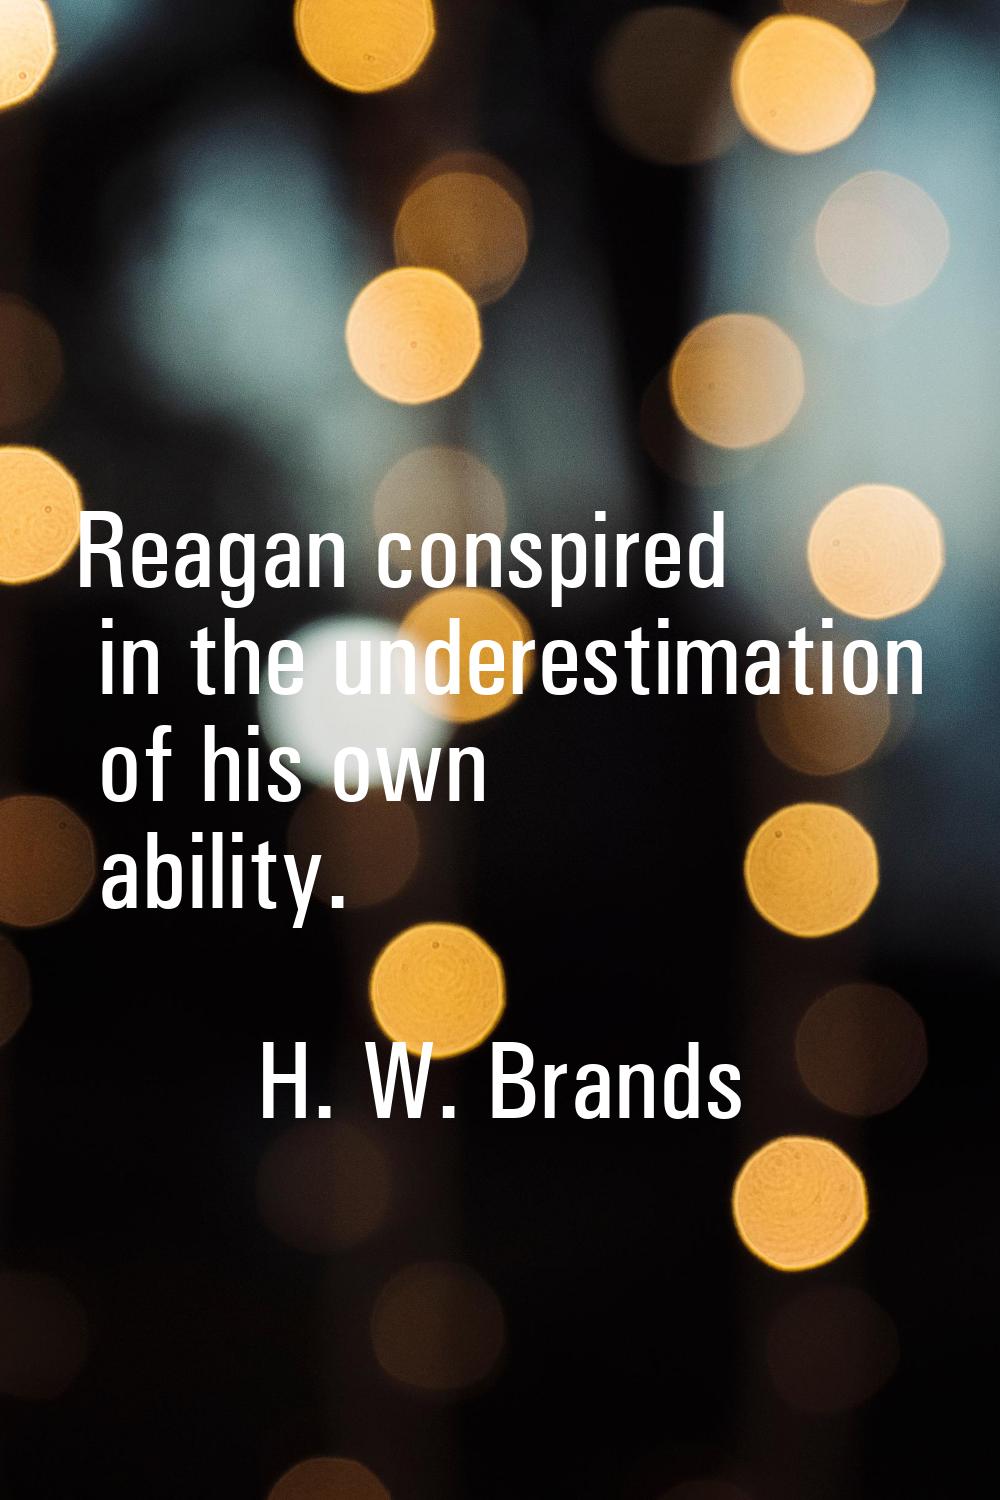 Reagan conspired in the underestimation of his own ability.